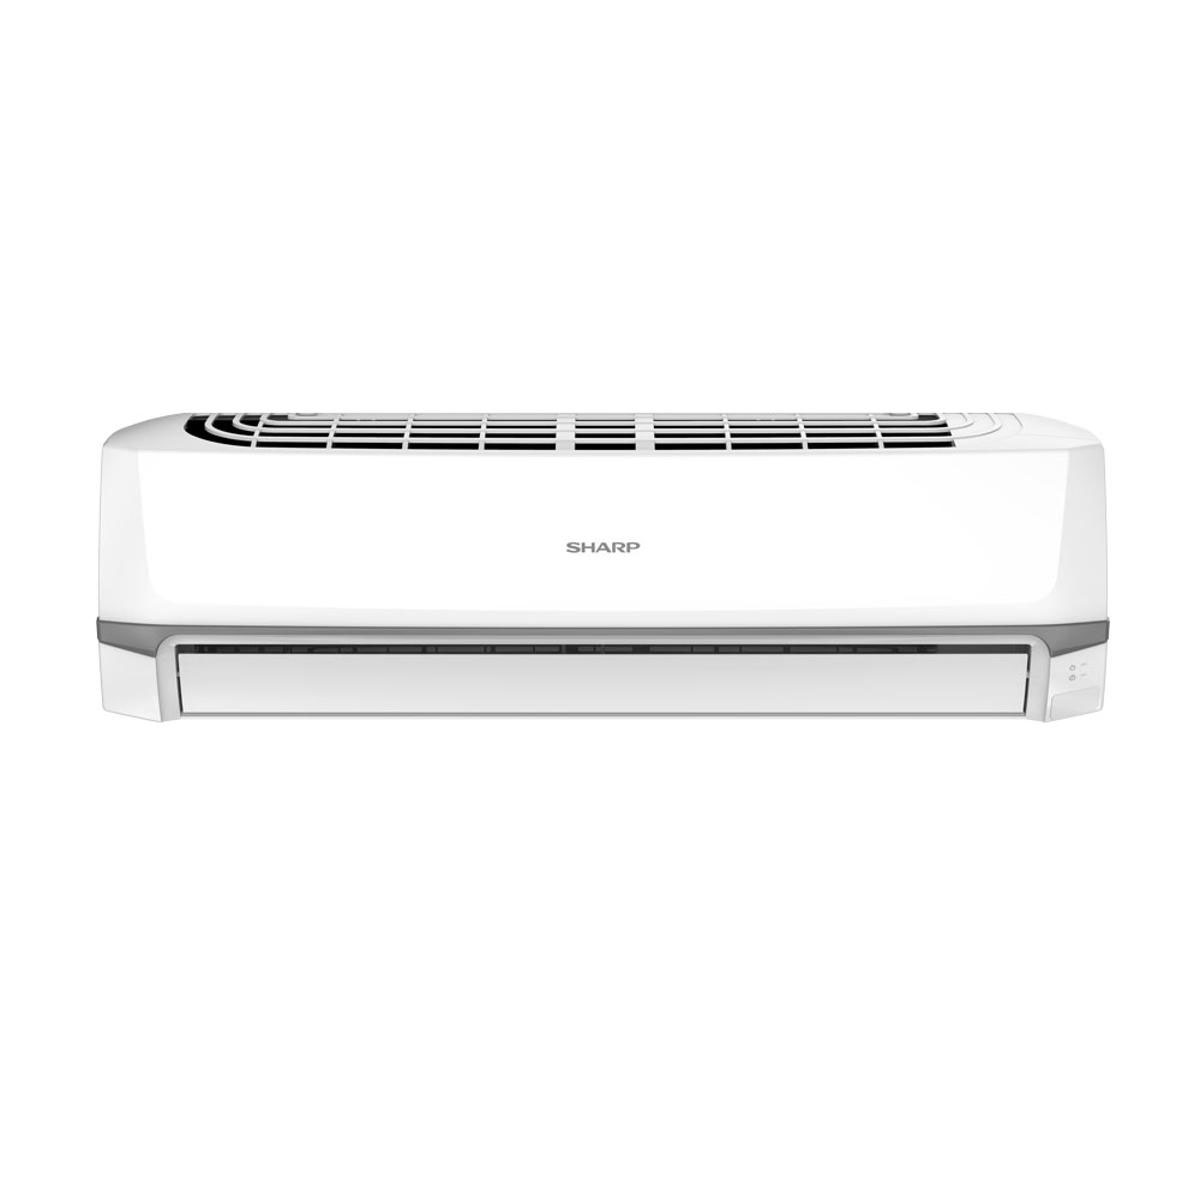 SHARP 2.0 Ton Split Wall Type Air Conditioner AH-A24ZEVE